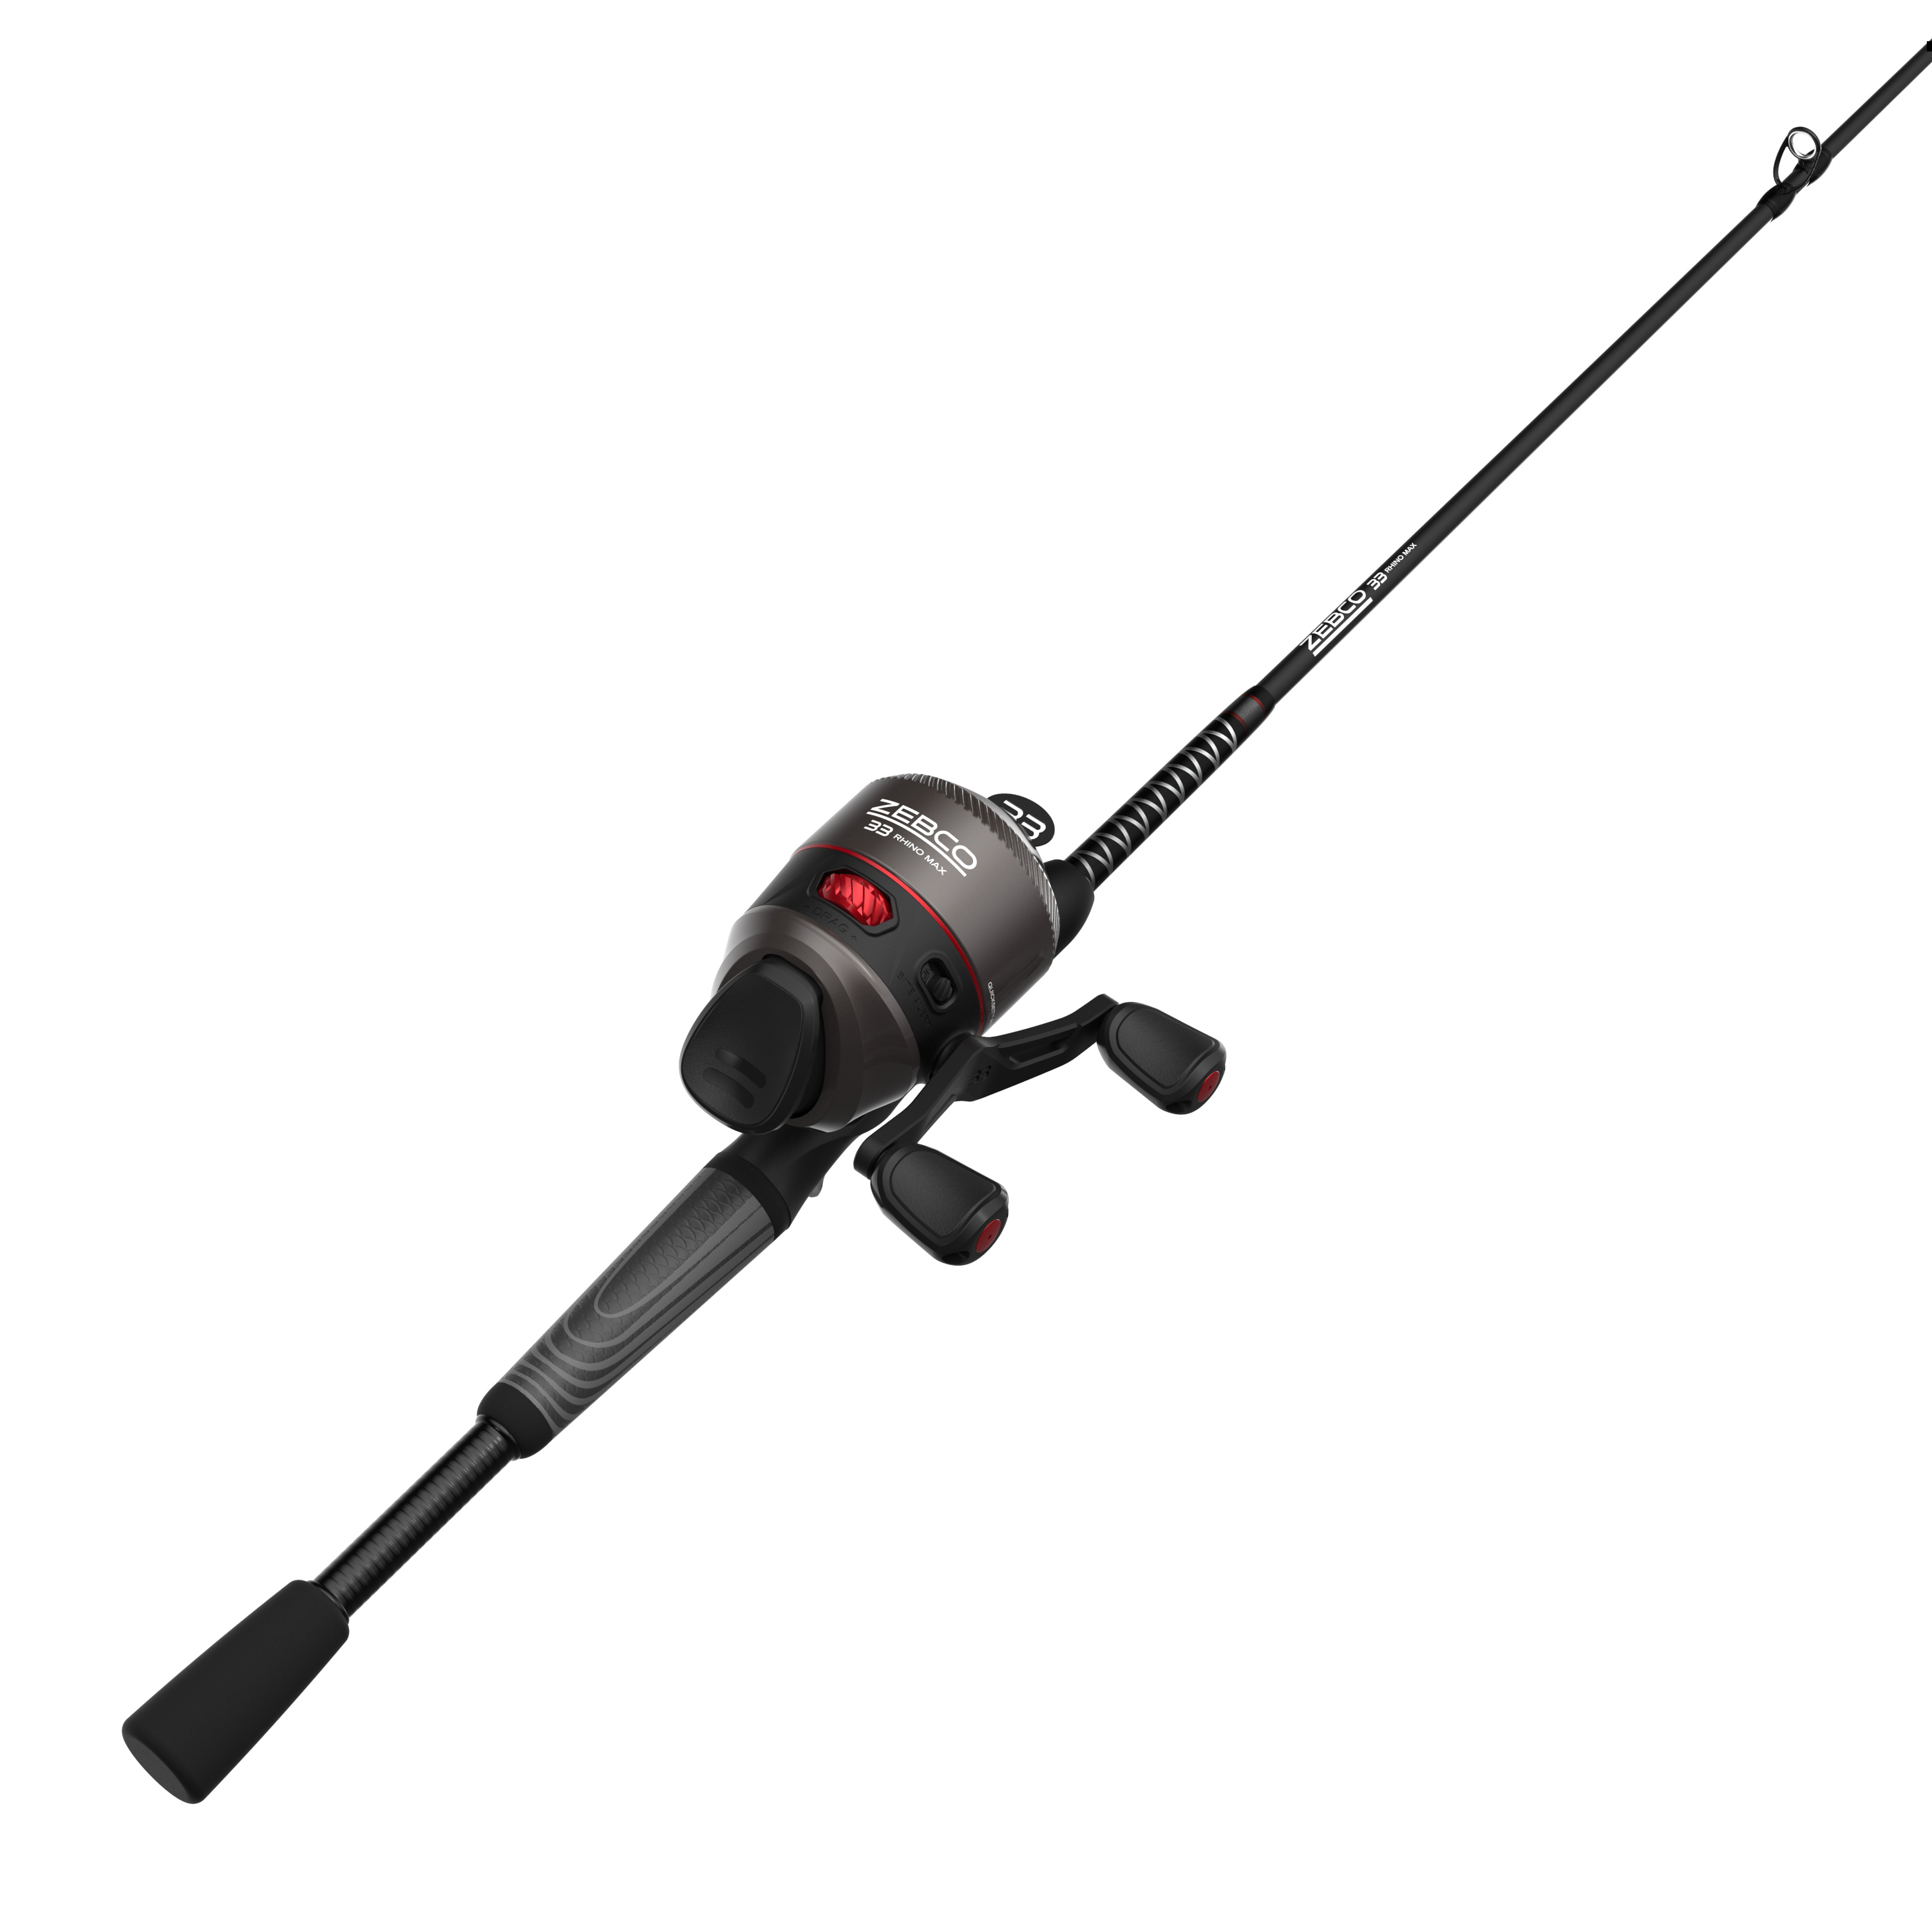 Zebco 33 Spincast Reel and Fishing Rod Combo, 6-Foot 2-Piece Rod;  Assortment: Available in Black or Purple 